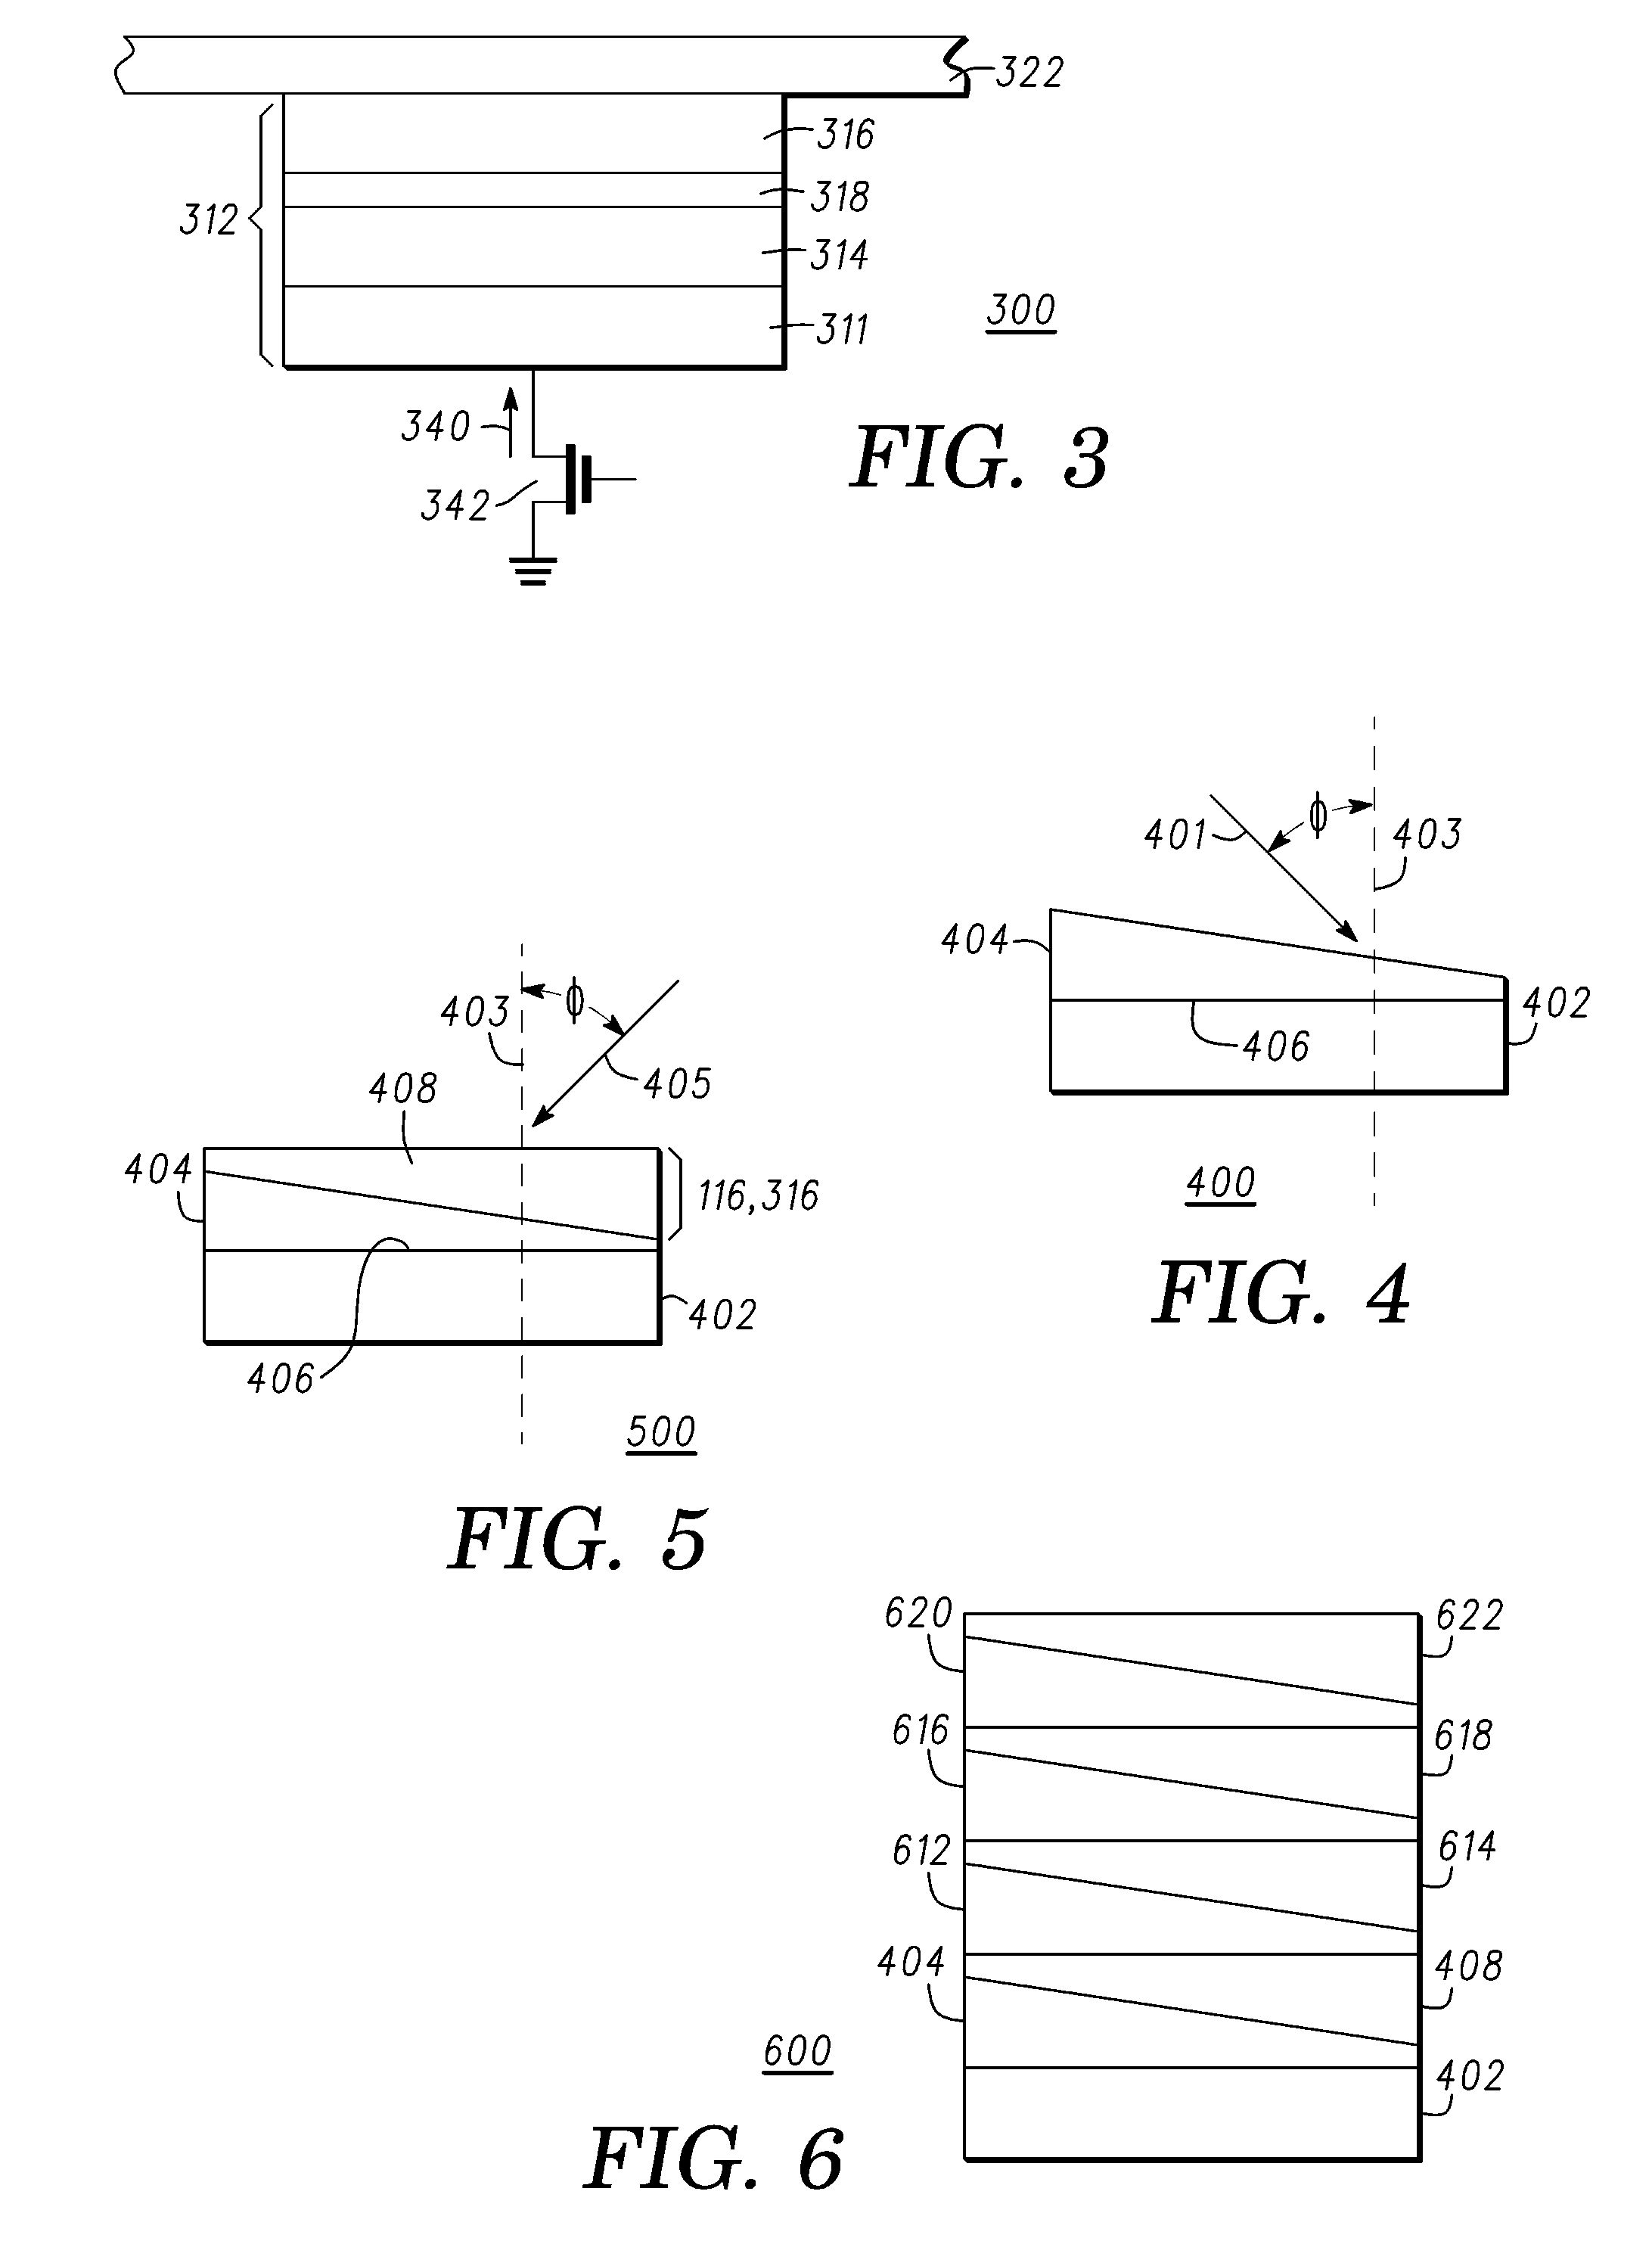 Structure and method for fabricating a magnetic thin film memory having a high field anisotropy